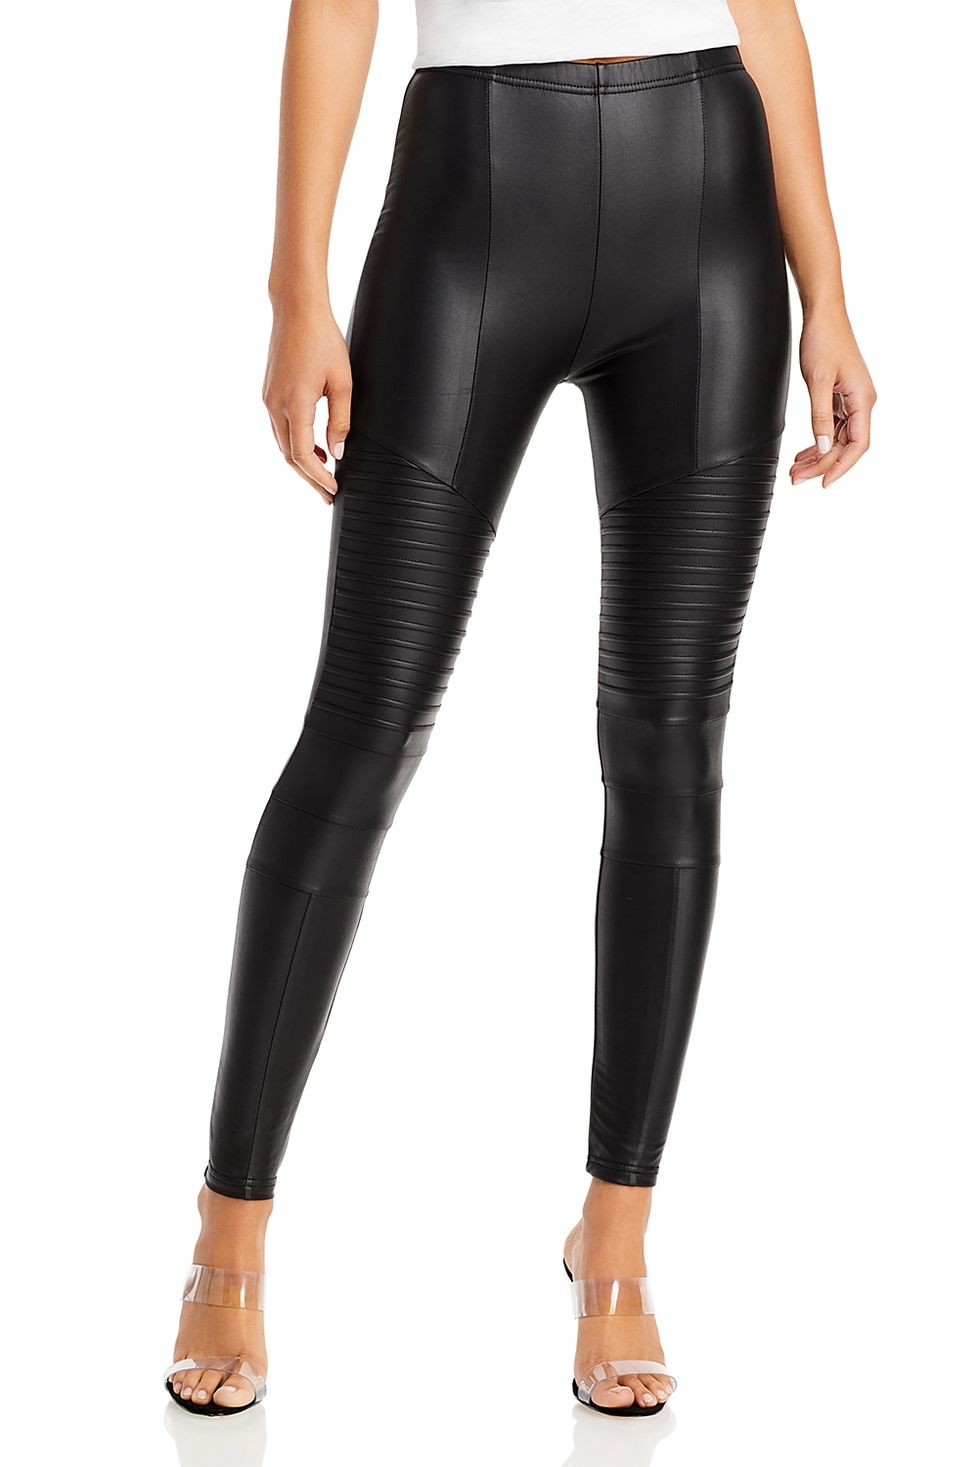 Cette Opaque THERMAL TIGHTS 300 DEN with Warm Fleece Inner (Hoseiree.com)